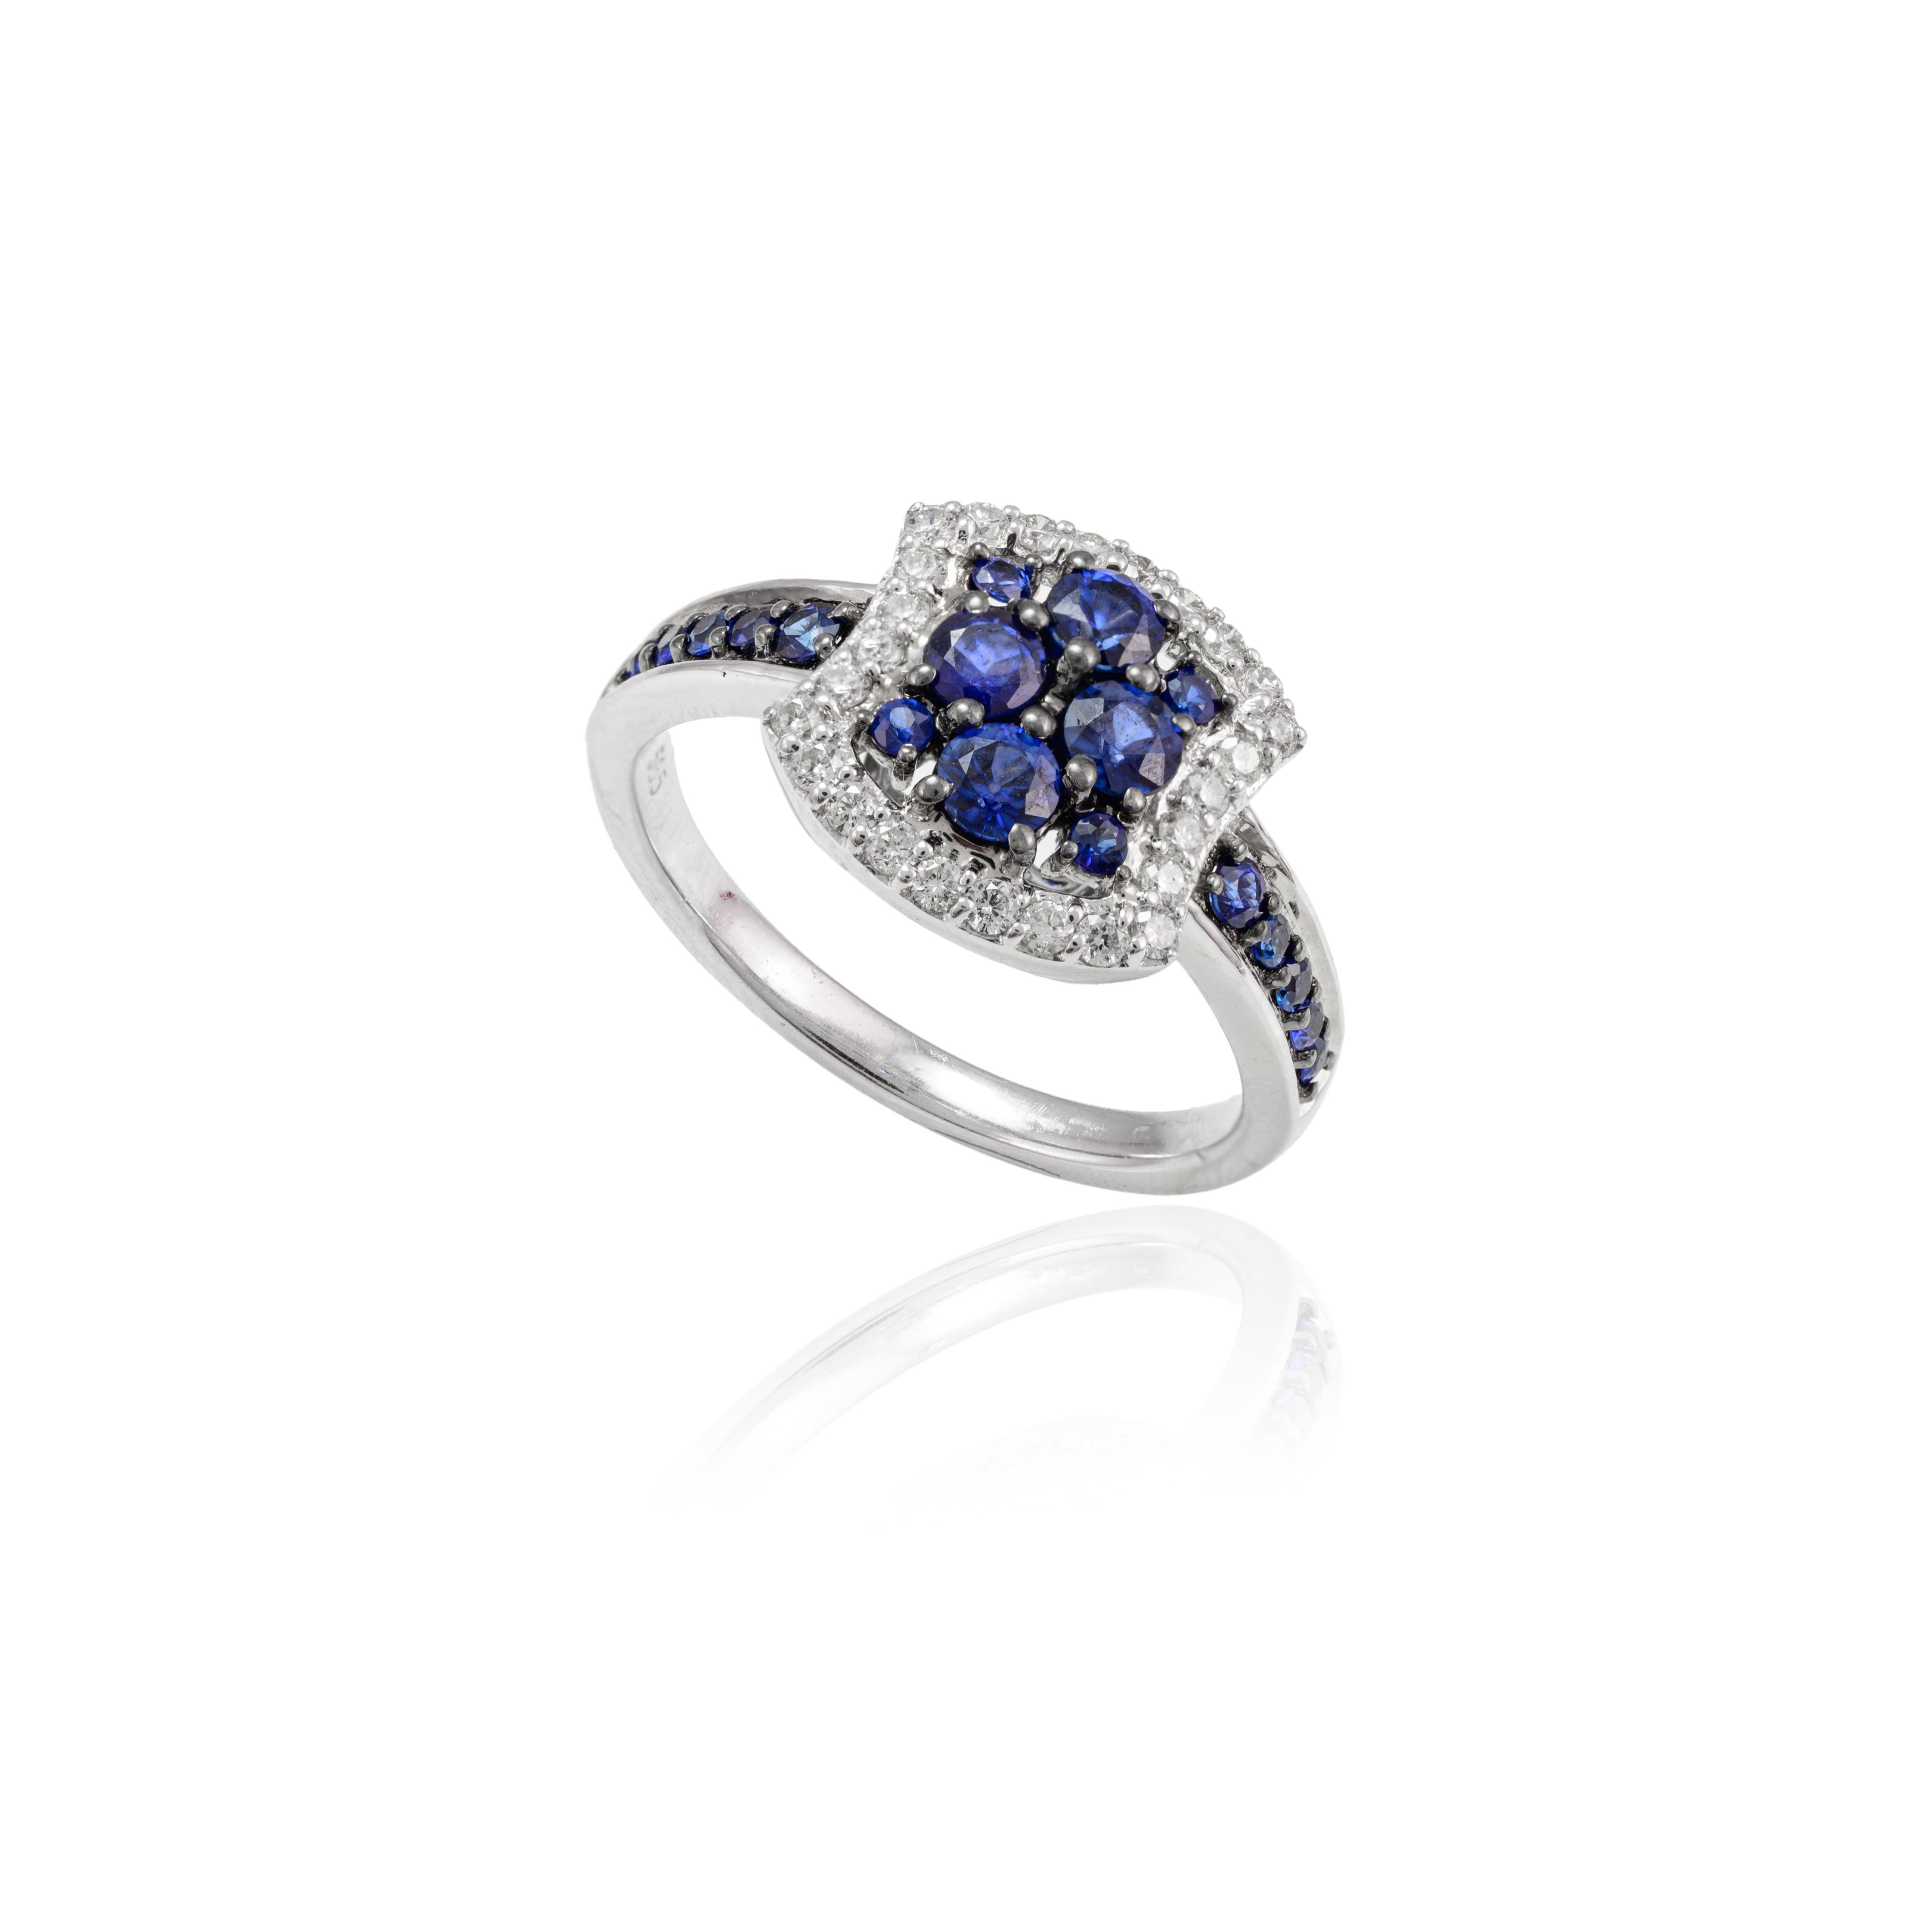 For Sale:  Antique Blue Sapphire and Diamond Engagement Ring in 14k Solid White Gold 7